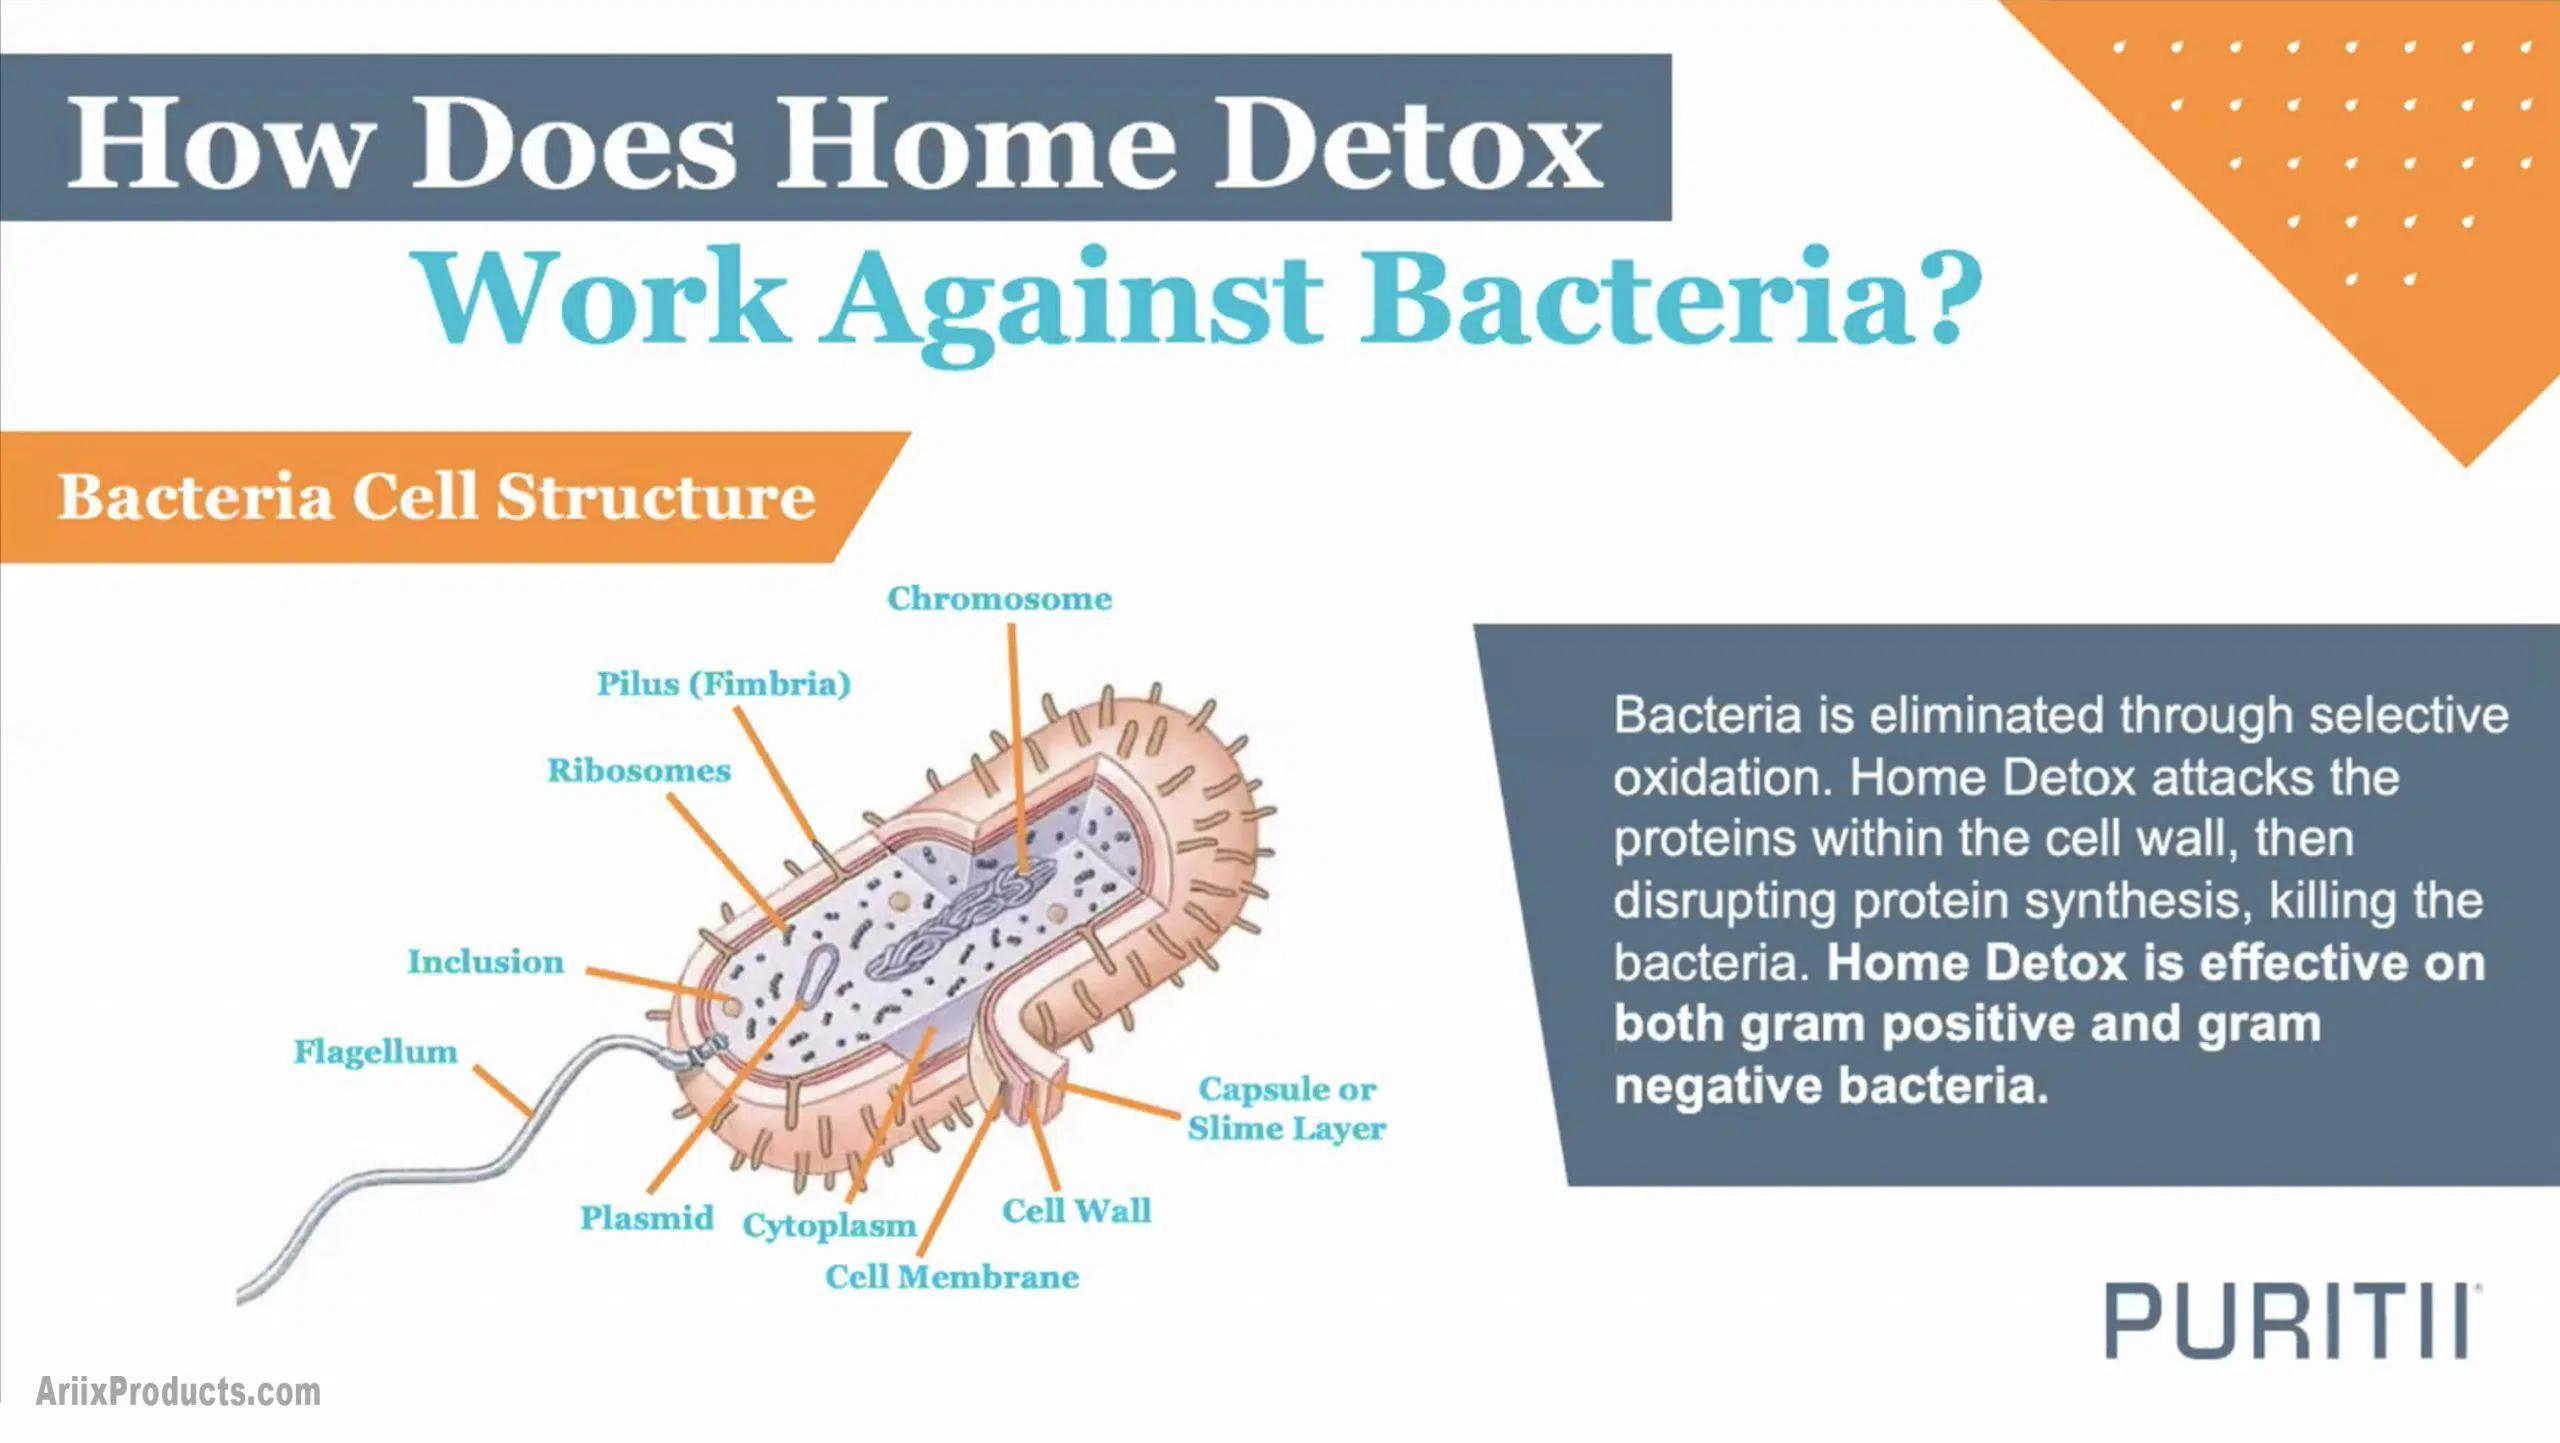 08 How Does Home Detox Work Against Bacteria